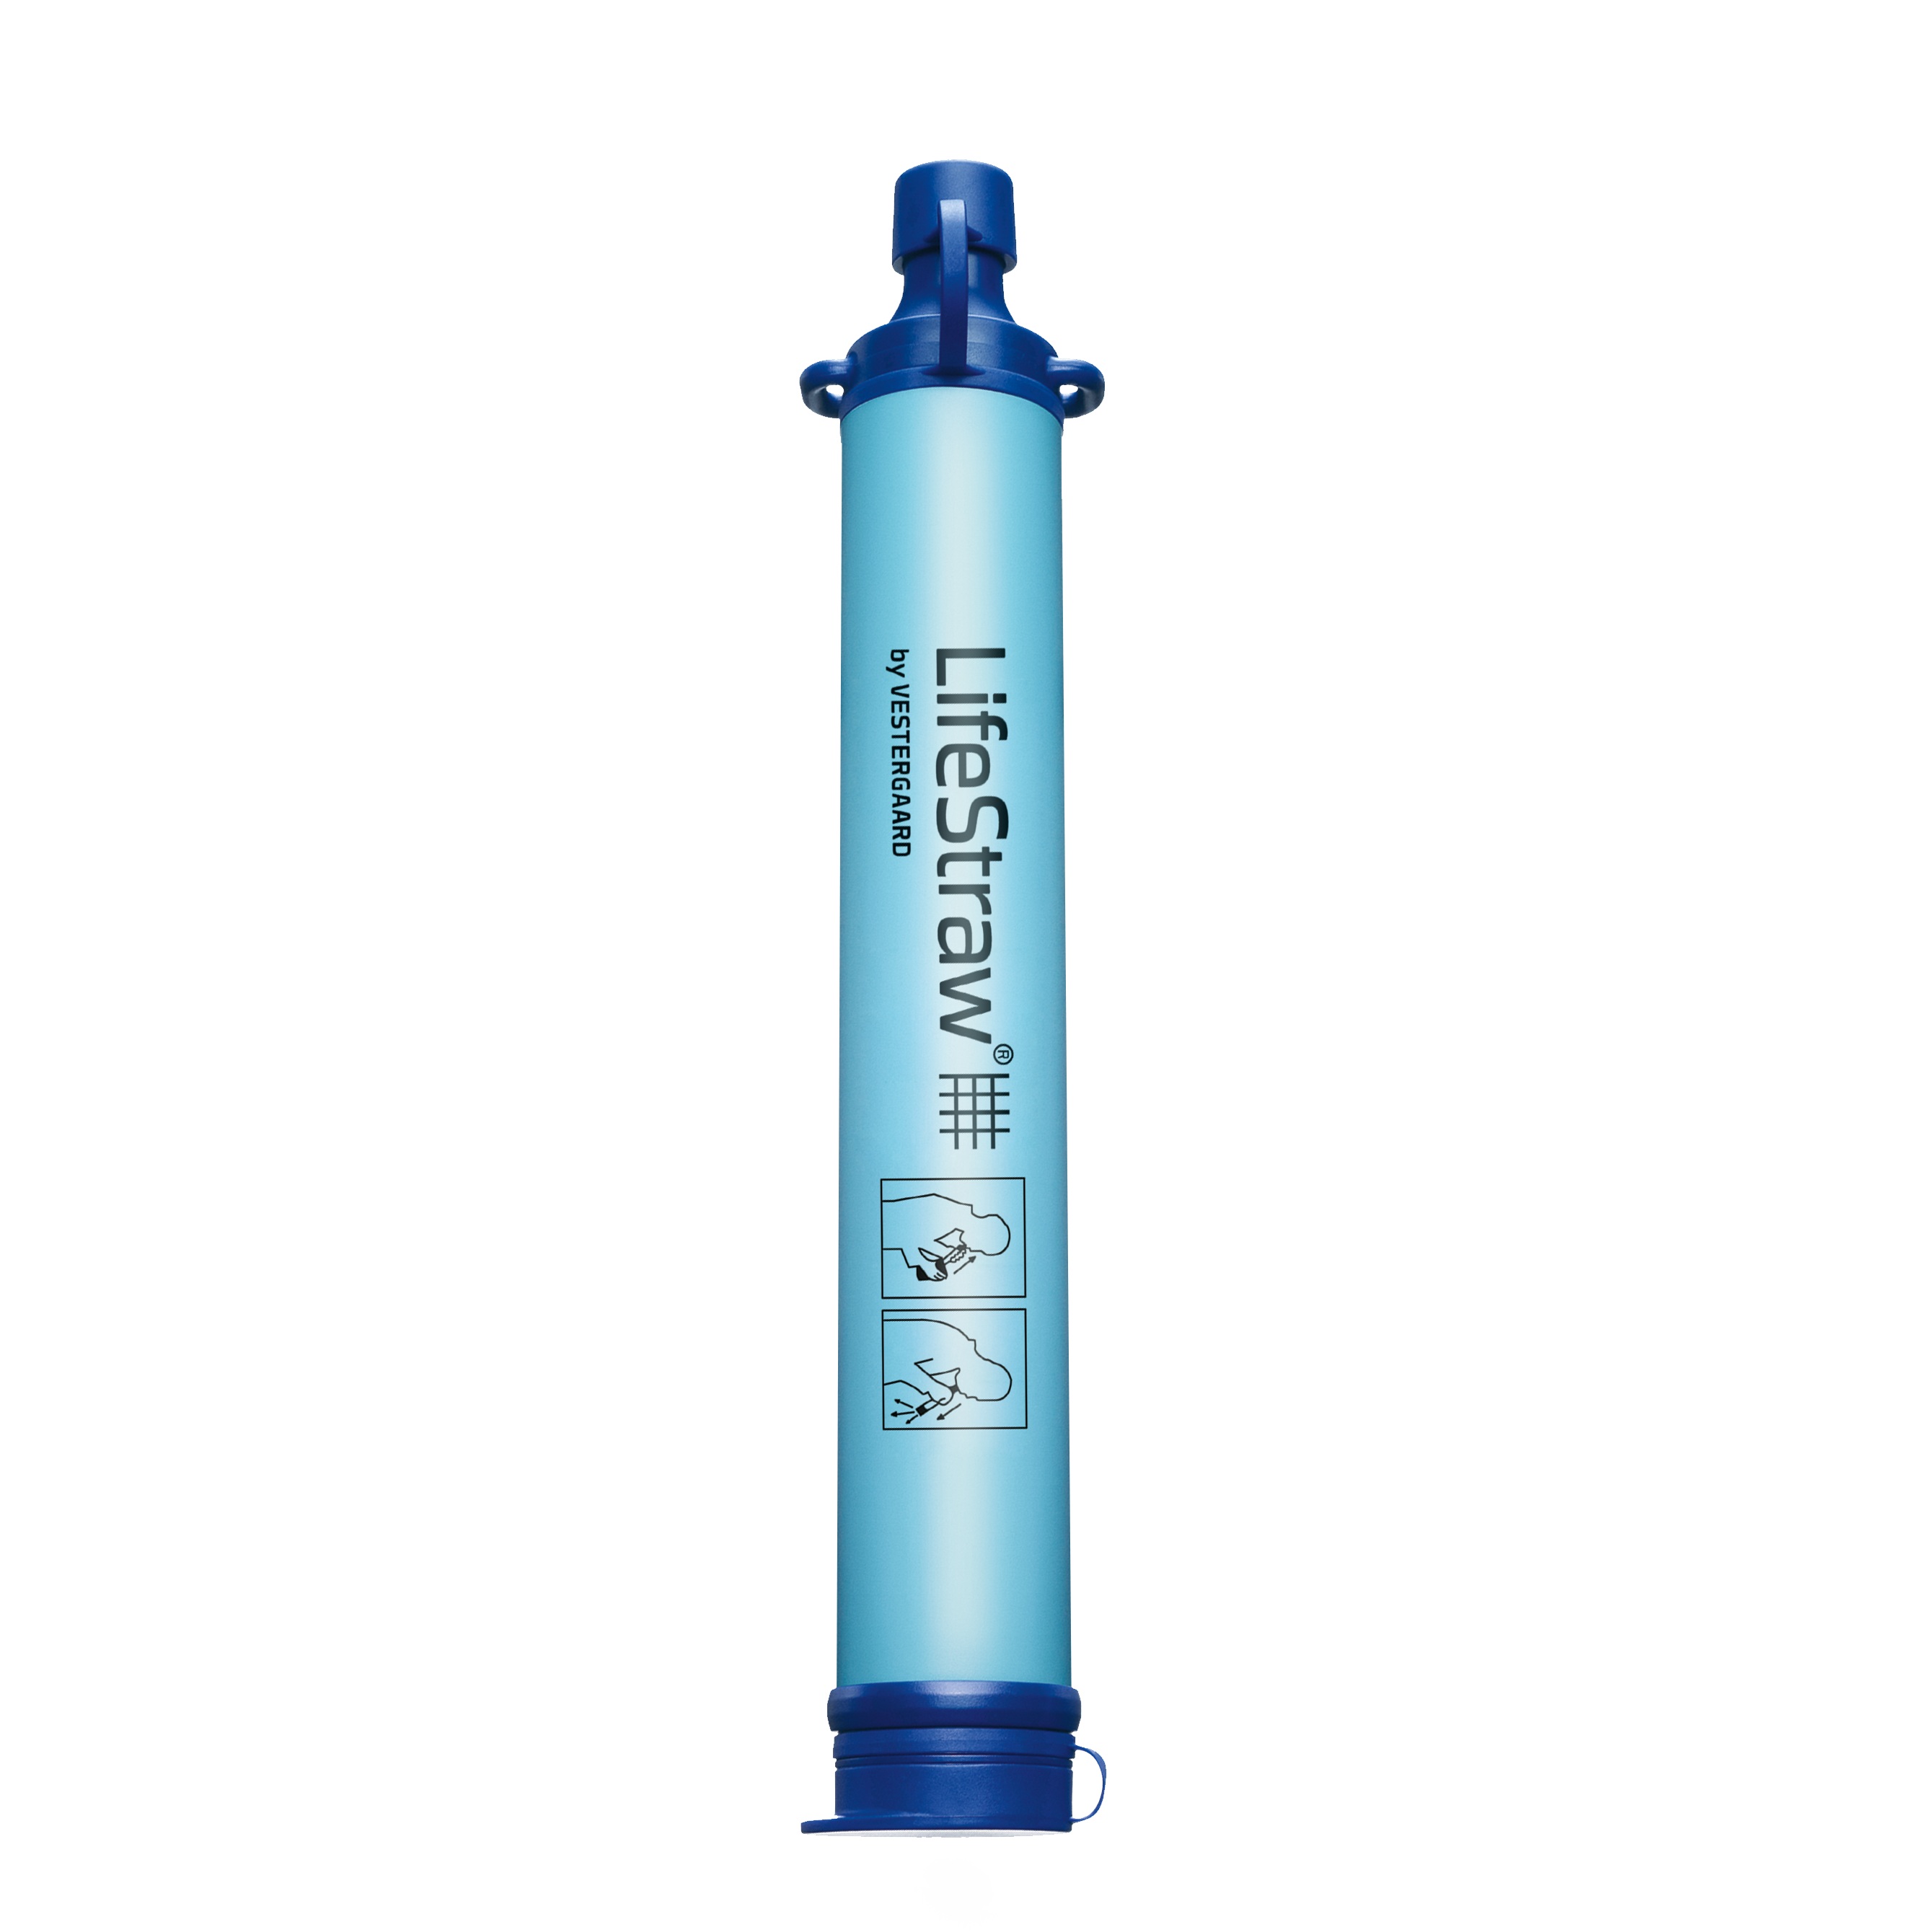 https://www.waterbrick.org/wp-content/uploads/2017/04/lifestraw-high-res-isolated-1.png